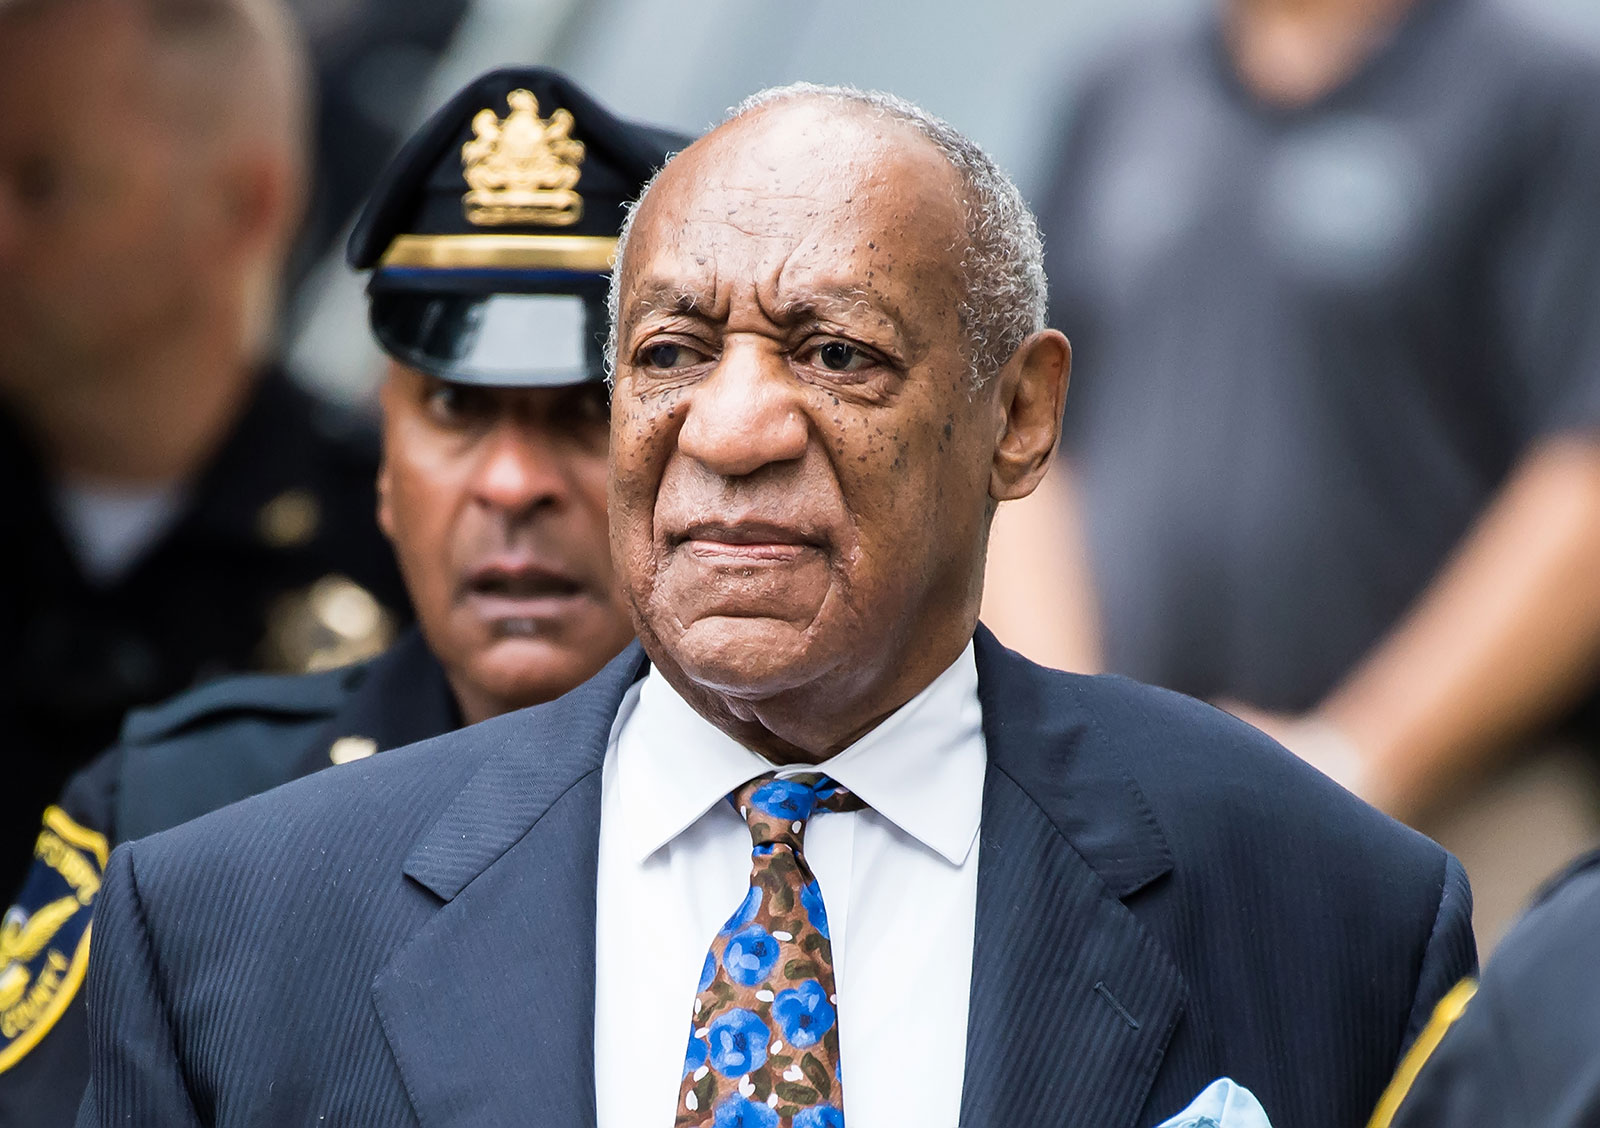 Bill Cosby arrives at the Montgomery County courthouse in 2018.